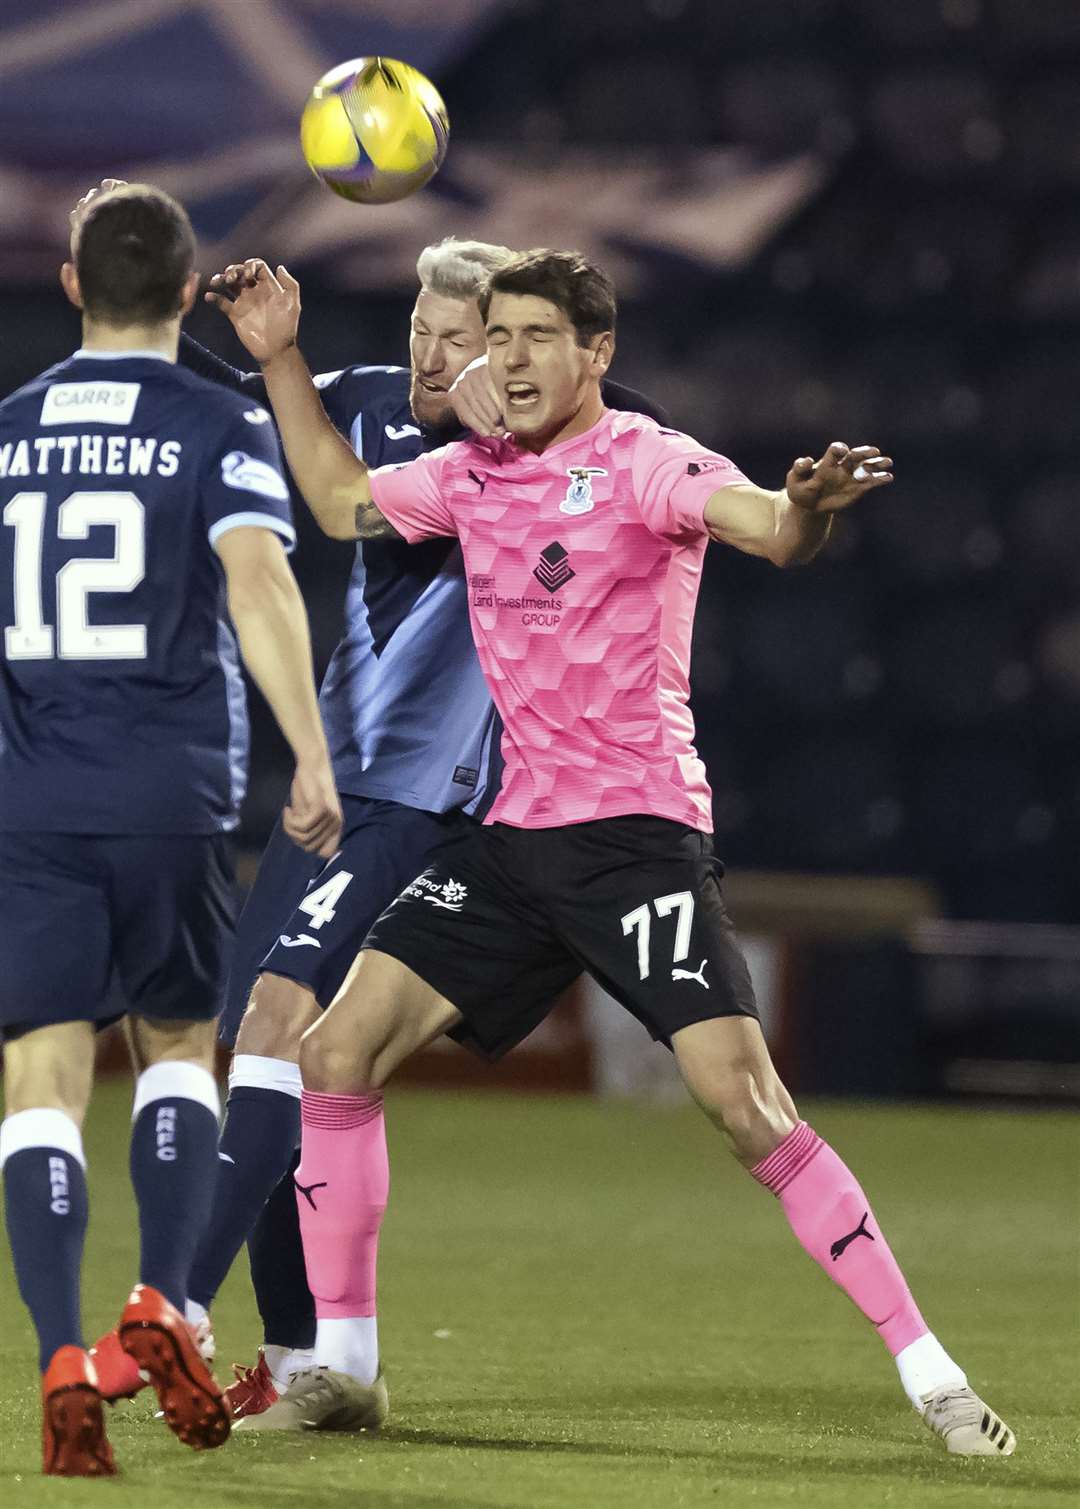 Nikolay Todorov playing against Raith Rovers last month. Picture: Willie Vass